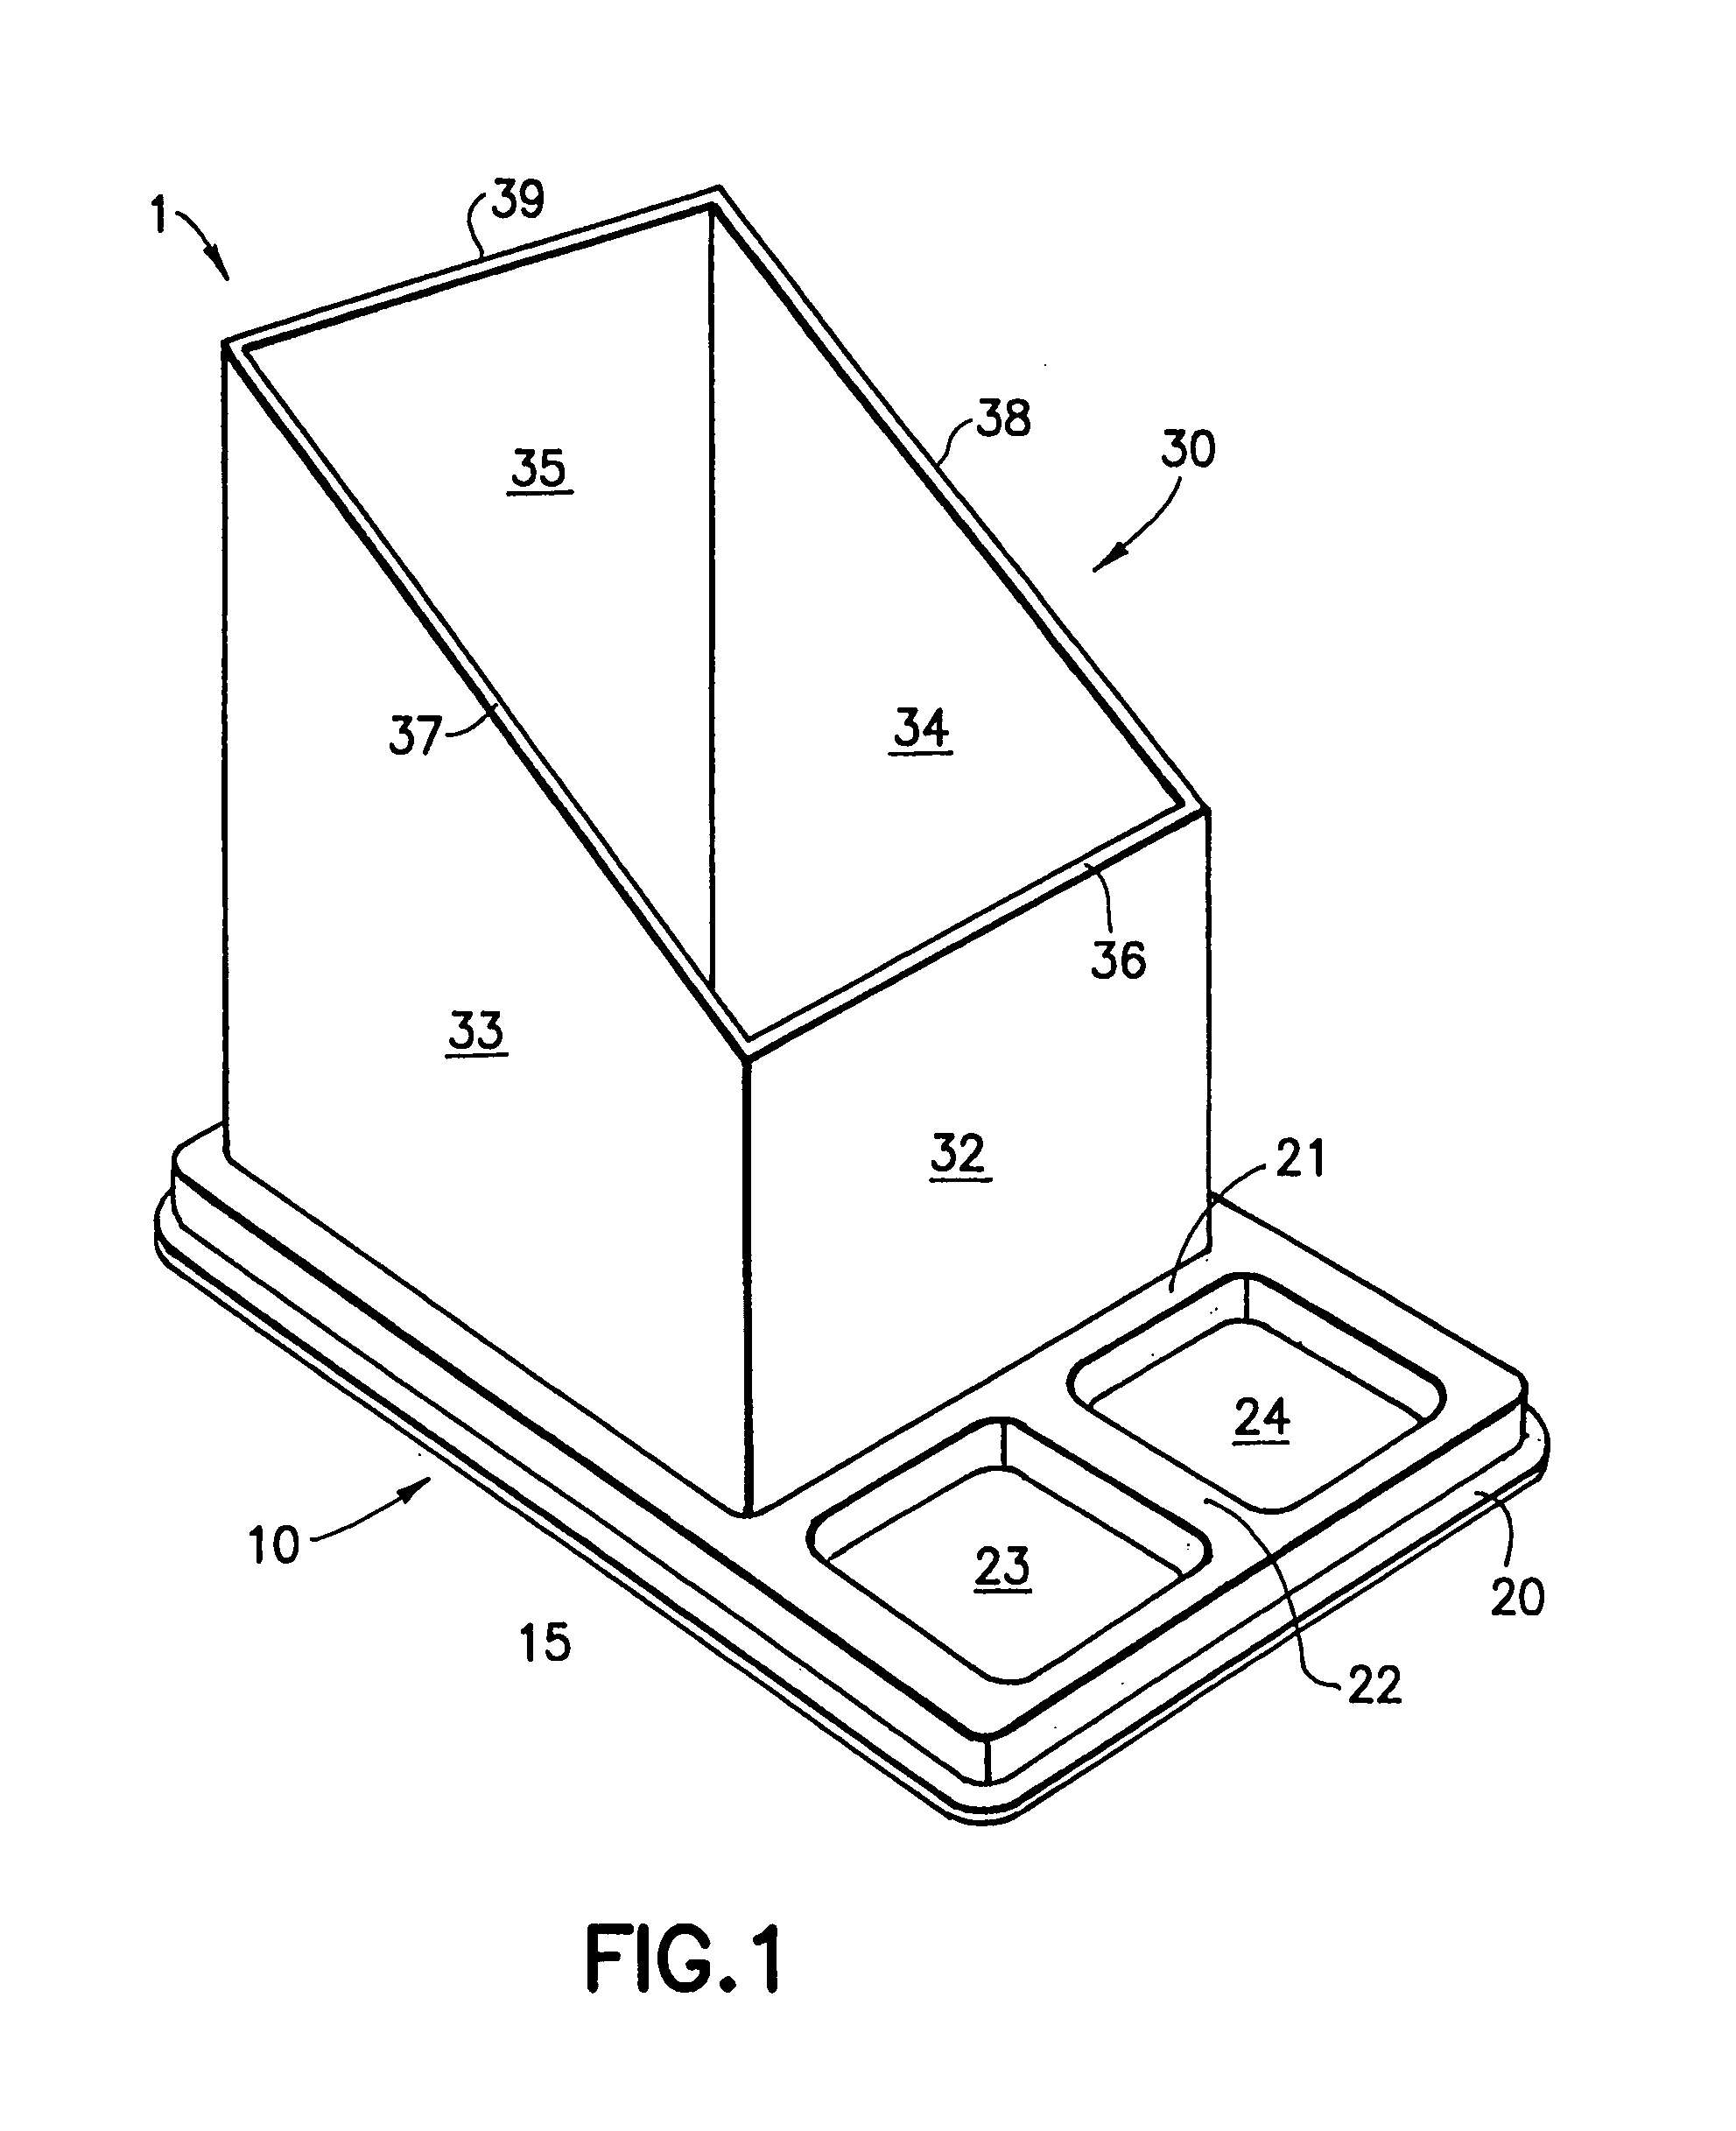 Device for pharmacy prescription shelf use to store medications and information related to the medications